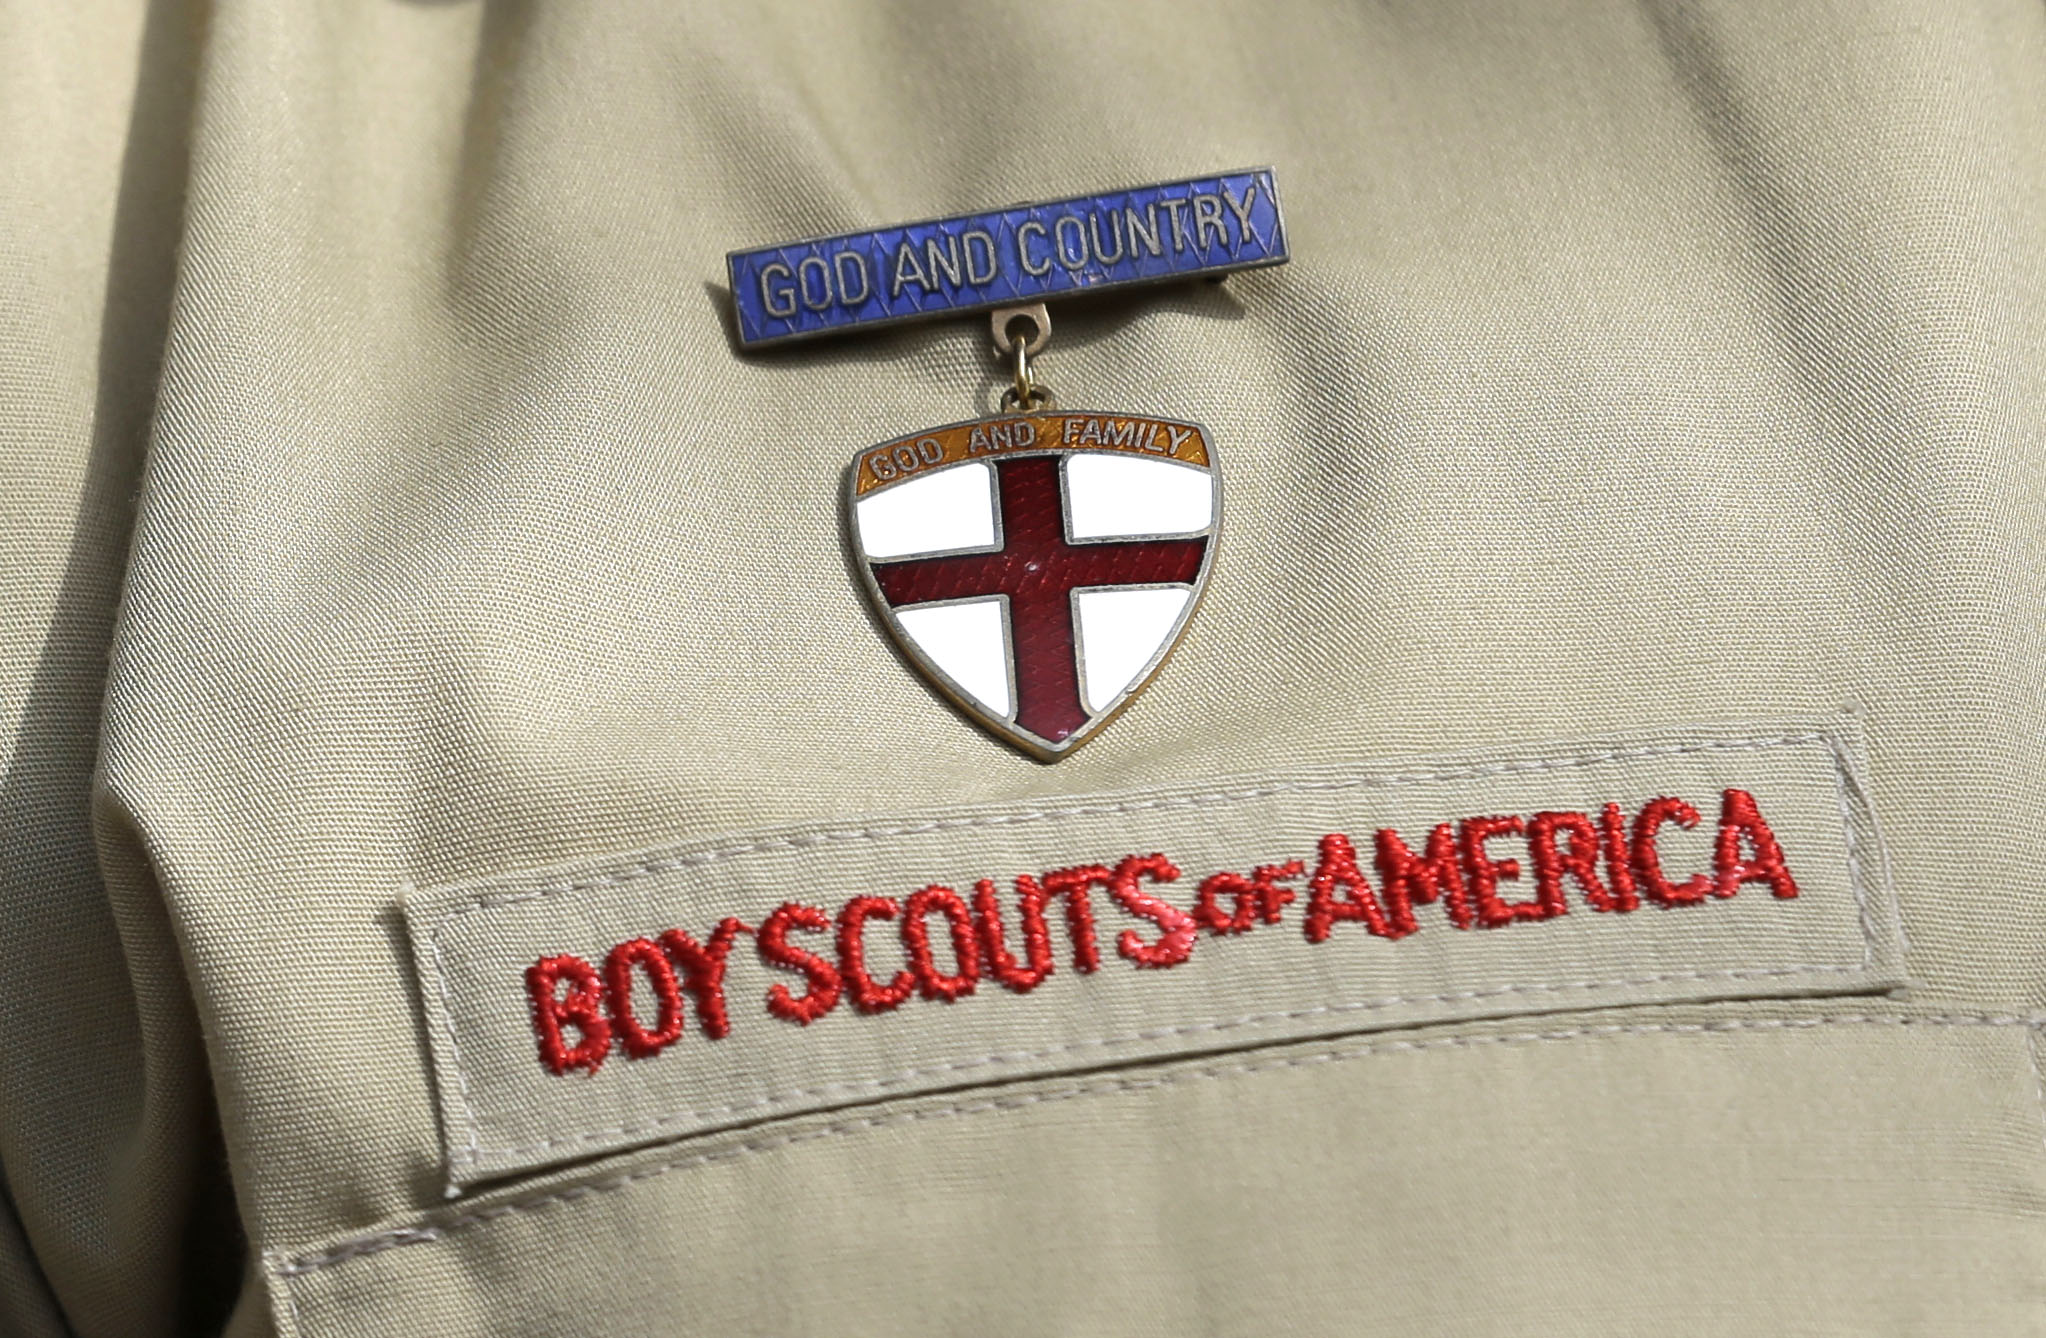 PHOTO: In this Feb. 4, 2013 file photo, a close up detail of a Boy Scout uniform is worn during a news conference in front of the Boy Scouts of America headquarters in Irving, Texas.